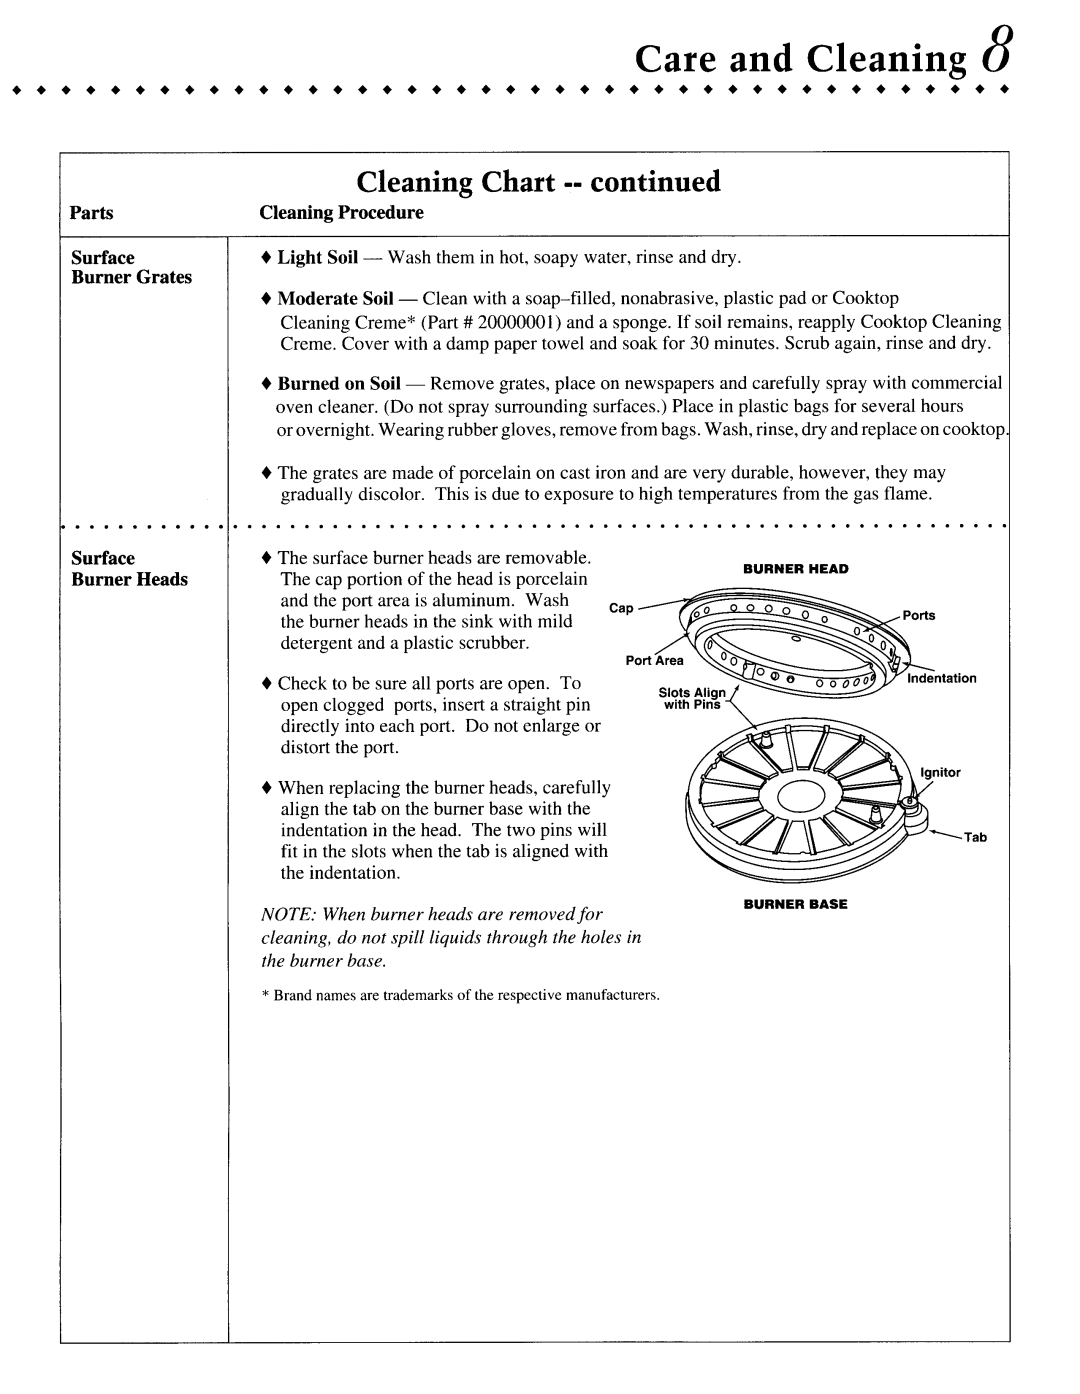 Jenn-Air CCGP2420P, CCGP2720P, CCGP2820P manual Cleaning Chart --continued, Care and Cleaning 8 4 4 4 4 4 4 4 